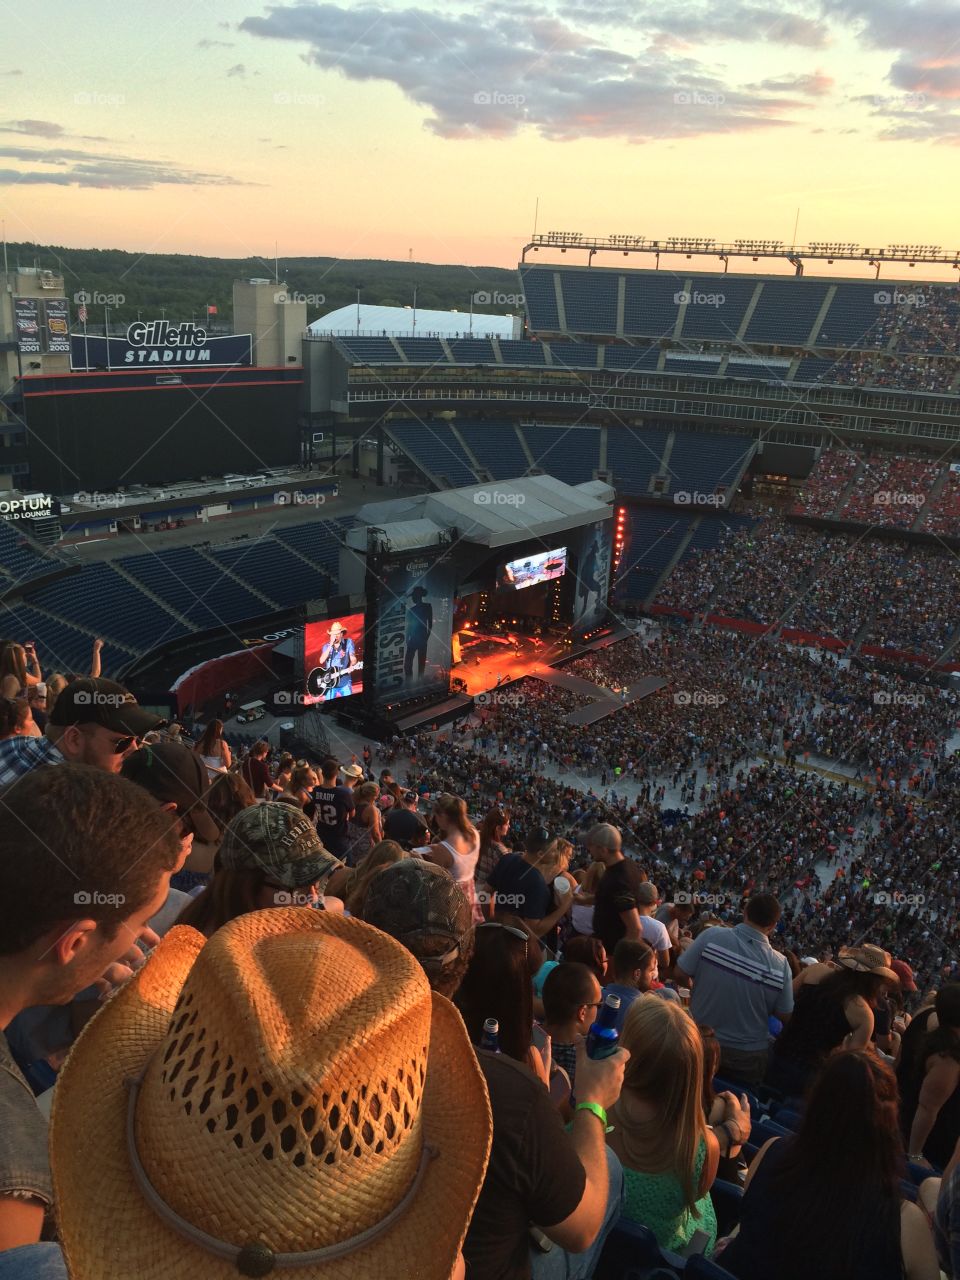 Jason Aldean 2015. Country fest 2015 with Kenny Chesney and Jason Aldean at Gilette stadium 